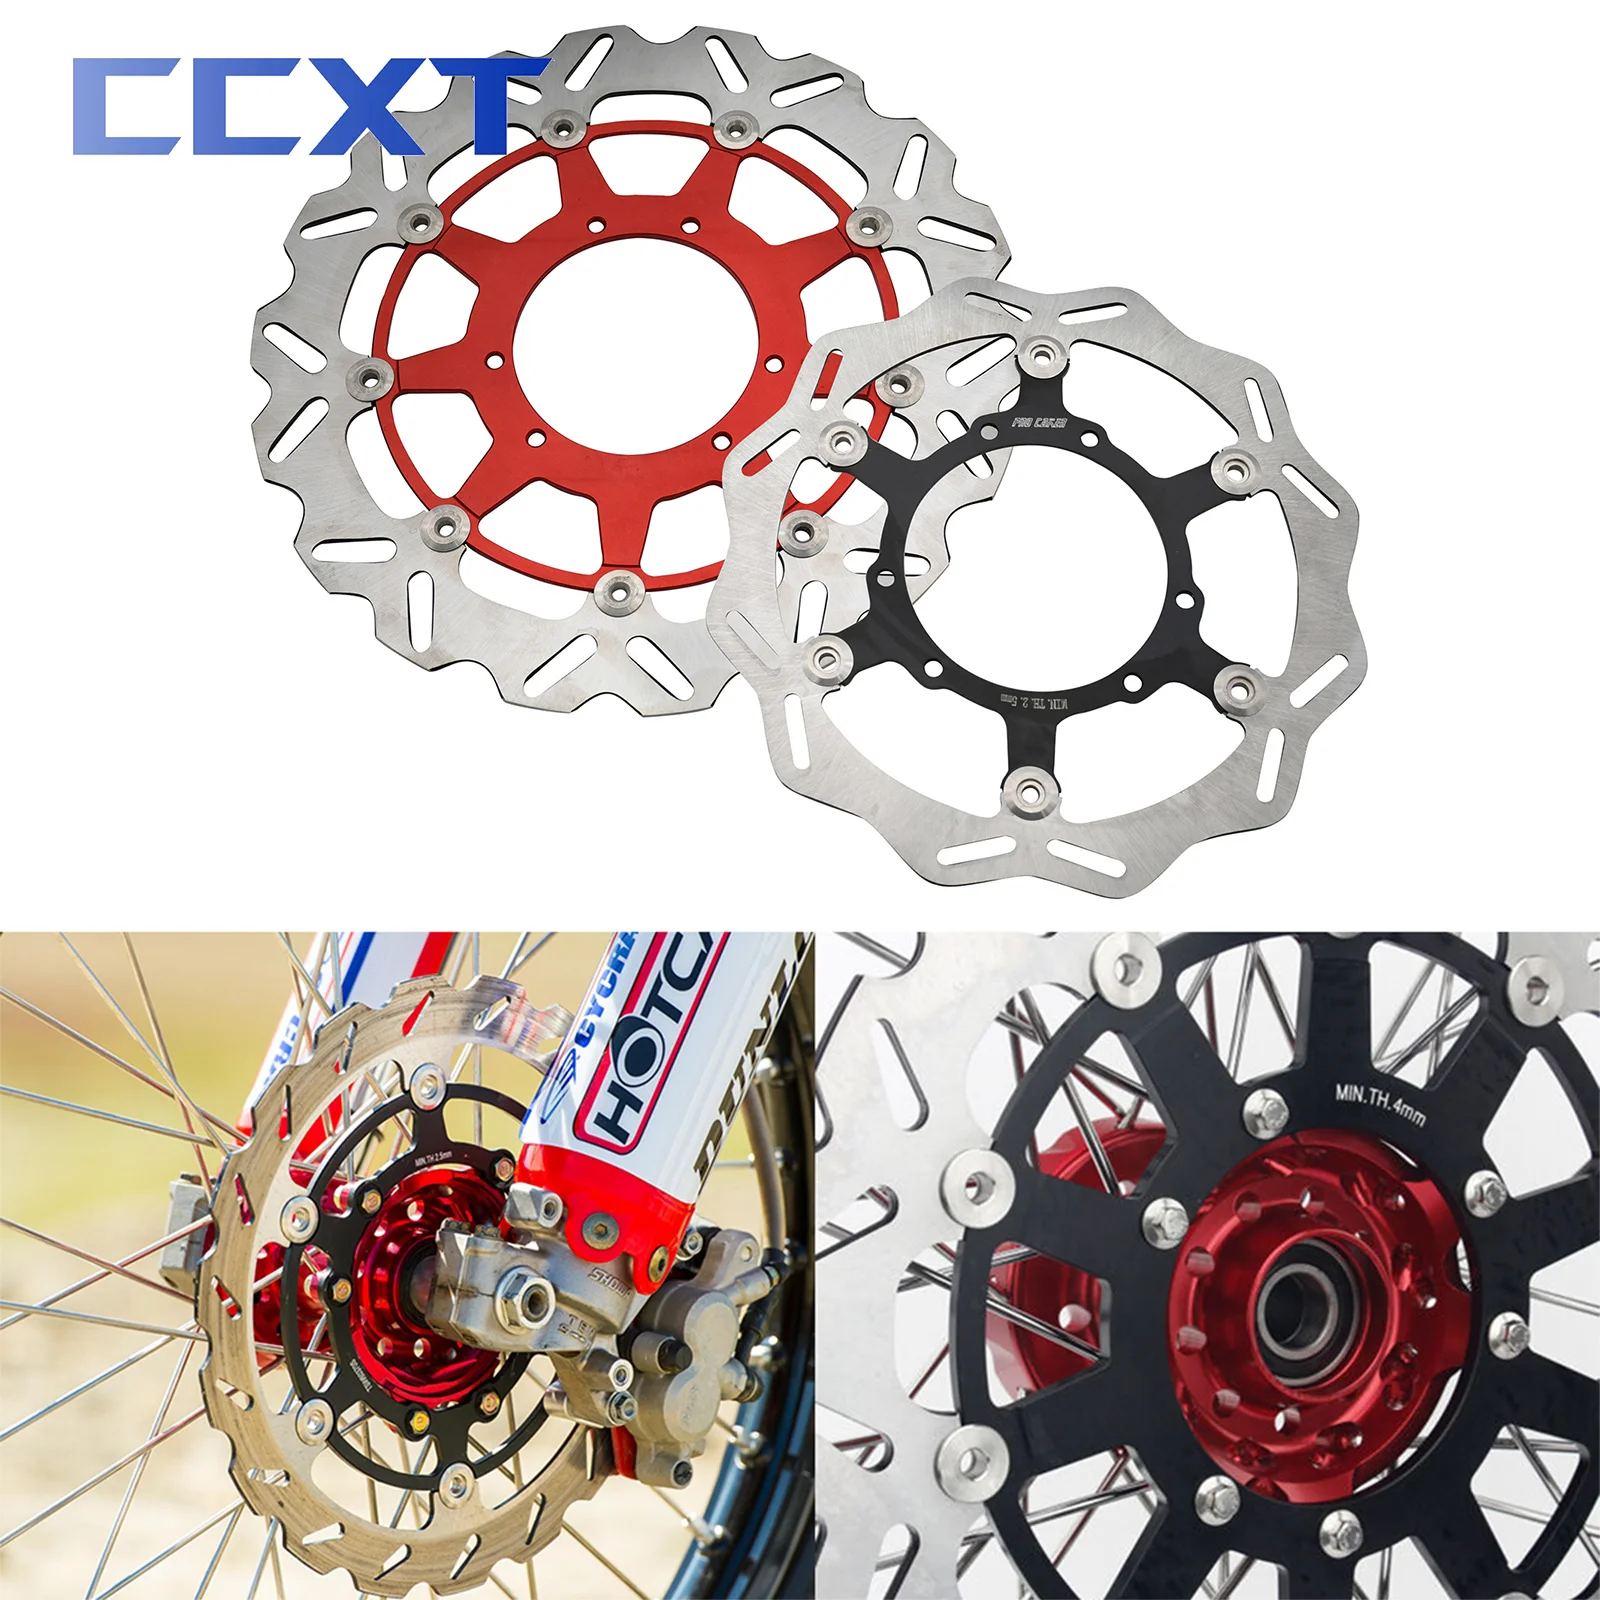 

Motorcross 320mm 260mm Rotor Disk Front Floating Brake Disc For Honda CRF250X CRF450X 2004-2019 CRF250RX CRF450RX 2004-2022 CRF